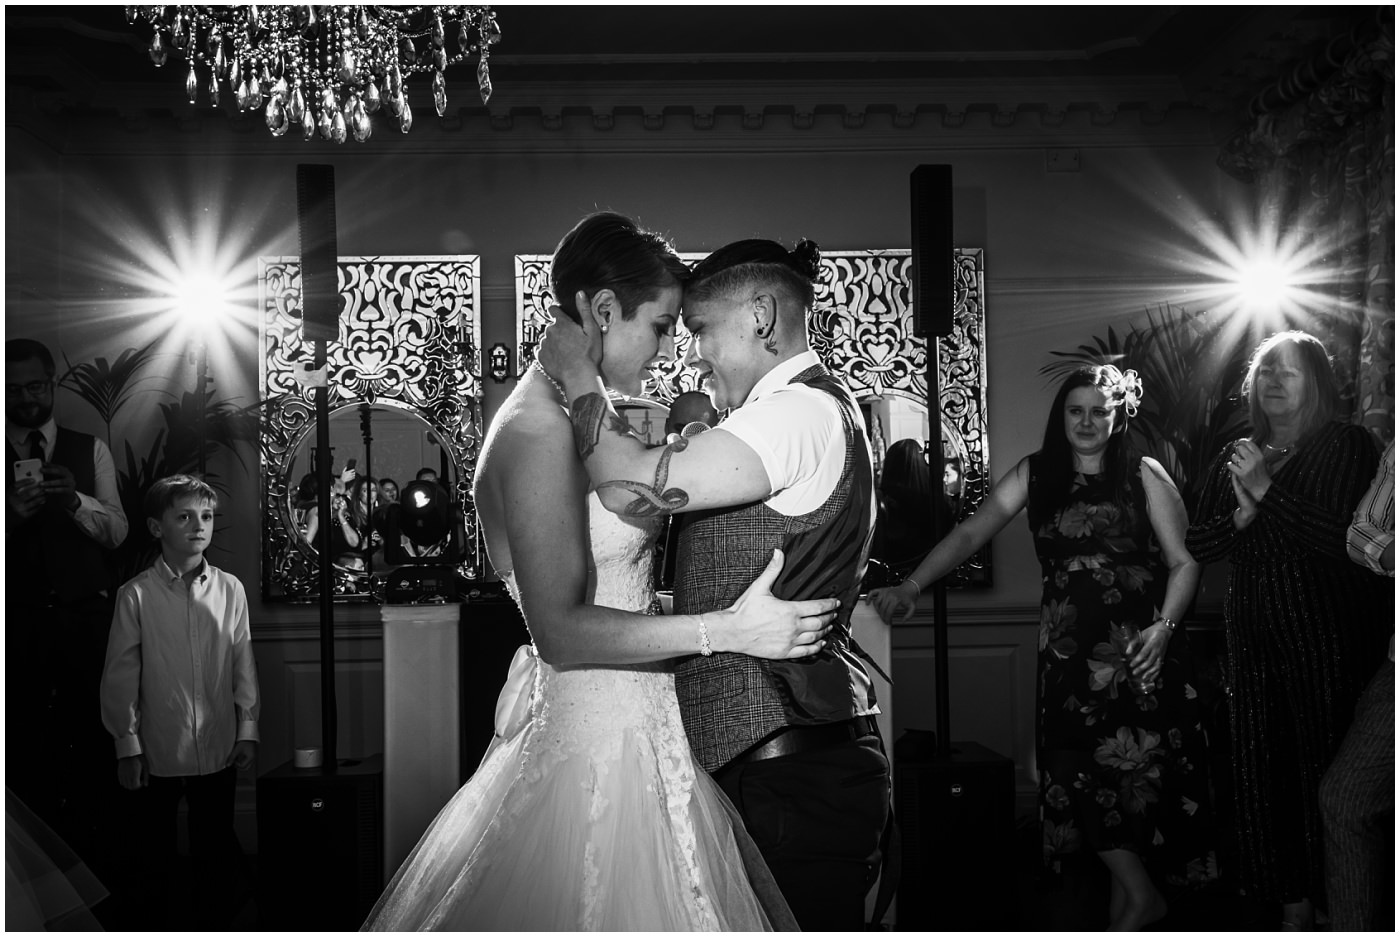 Two brides during their first dance at Eaves Hall Wedding